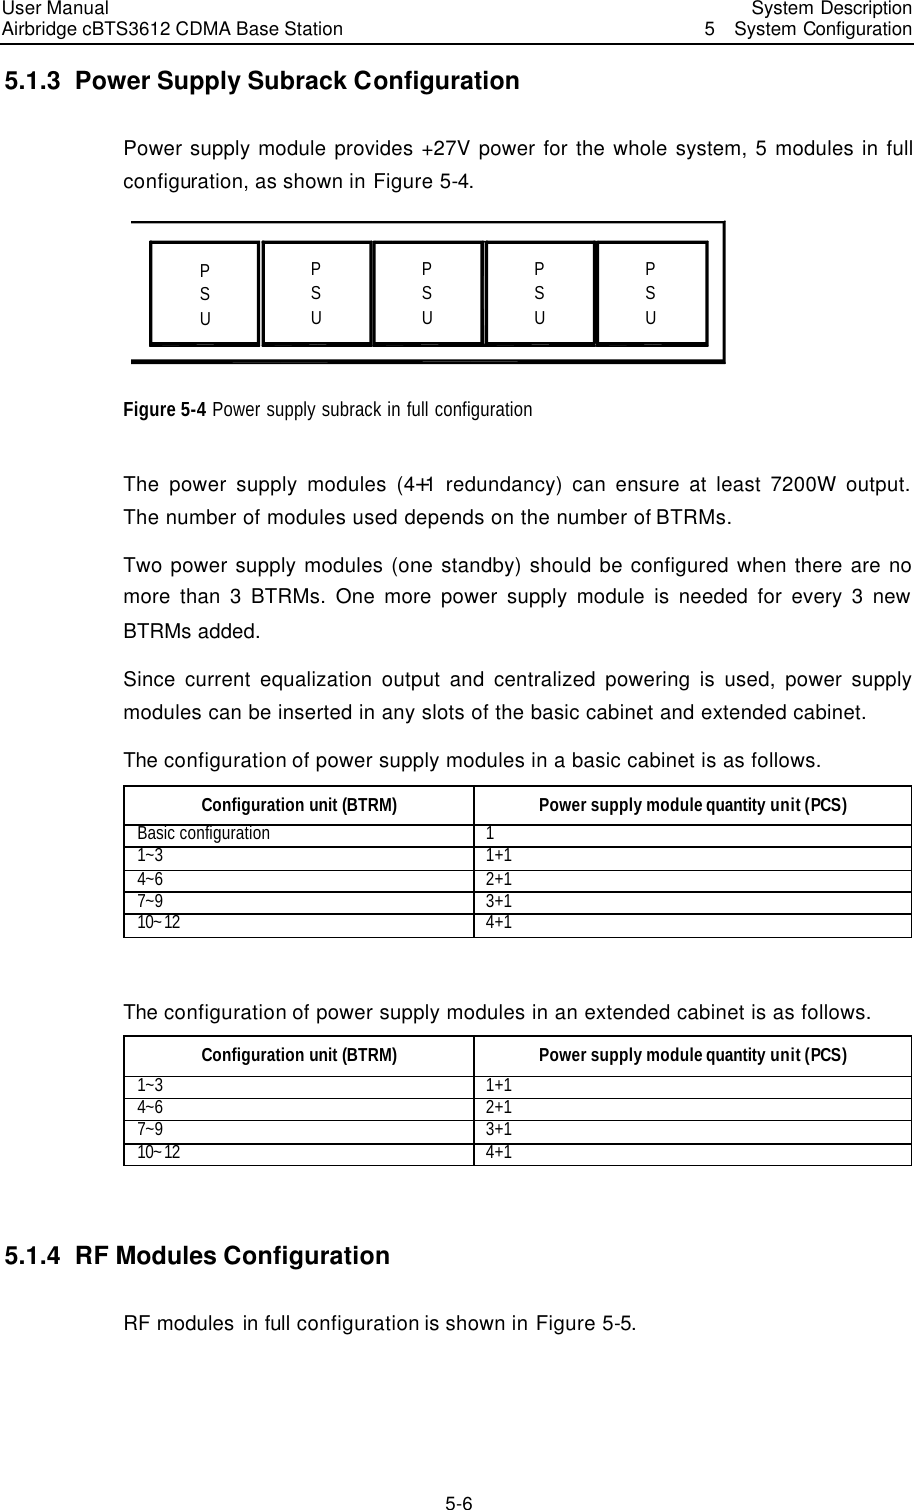 User Manual Airbridge cBTS3612 CDMA Base Station   System Description5  System Configuration 5-6 5.1.3  Power Supply Subrack Configuration Power supply module provides +27V power for the whole system, 5 modules in full configuration, as shown in Figure 5-4.   PSUPSUPSUPSUPSU Figure 5-4 Power supply subrack in full configuration The power supply modules (4＋1 redundancy) can ensure at least 7200W output. The number of modules used depends on the number of BTRMs.   Two power supply modules (one standby) should be configured when there are no more than 3 BTRMs. One more power supply module is needed for every 3 new BTRMs added. Since current equalization output and centralized powering is used, power supply modules can be inserted in any slots of the basic cabinet and extended cabinet.   The configuration of power supply modules in a basic cabinet is as follows. Configuration unit (BTRM) Power supply module quantity unit (PCS) Basic configuration 1 1~3 1+1 4~6 2+1 7~9 3+1 10~12 4+1  The configuration of power supply modules in an extended cabinet is as follows. Configuration unit (BTRM) Power supply module quantity unit (PCS) 1~3 1+1 4~6 2+1 7~9 3+1 10~12 4+1  5.1.4  RF Modules Configuration RF modules in full configuration is shown in Figure 5-5.   